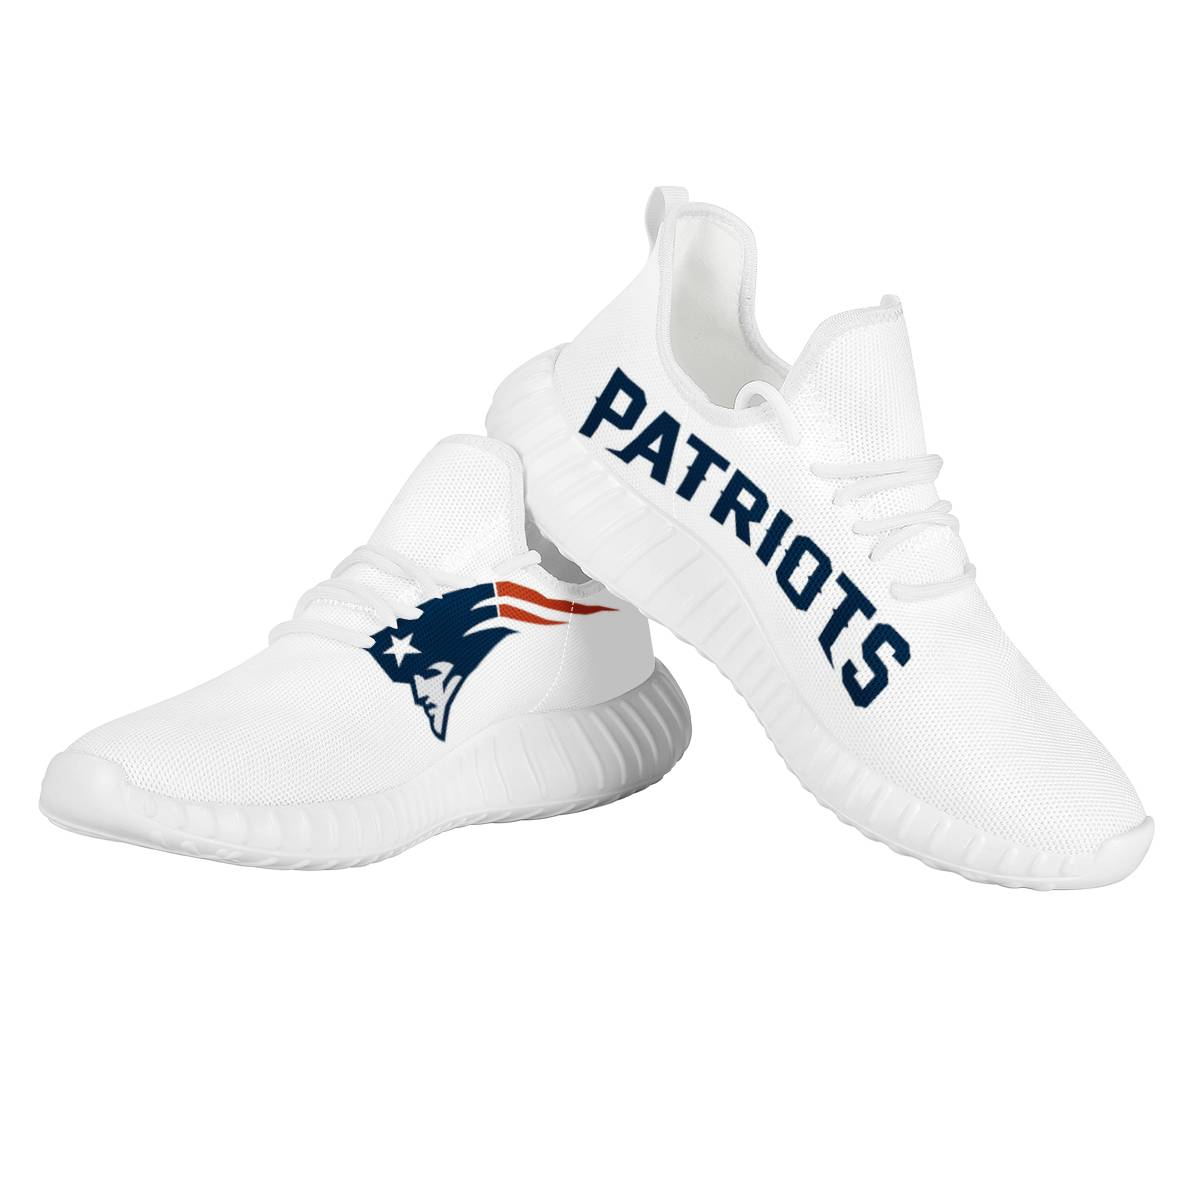 Women's New England Patriots Mesh Knit Sneakers/Shoes 015